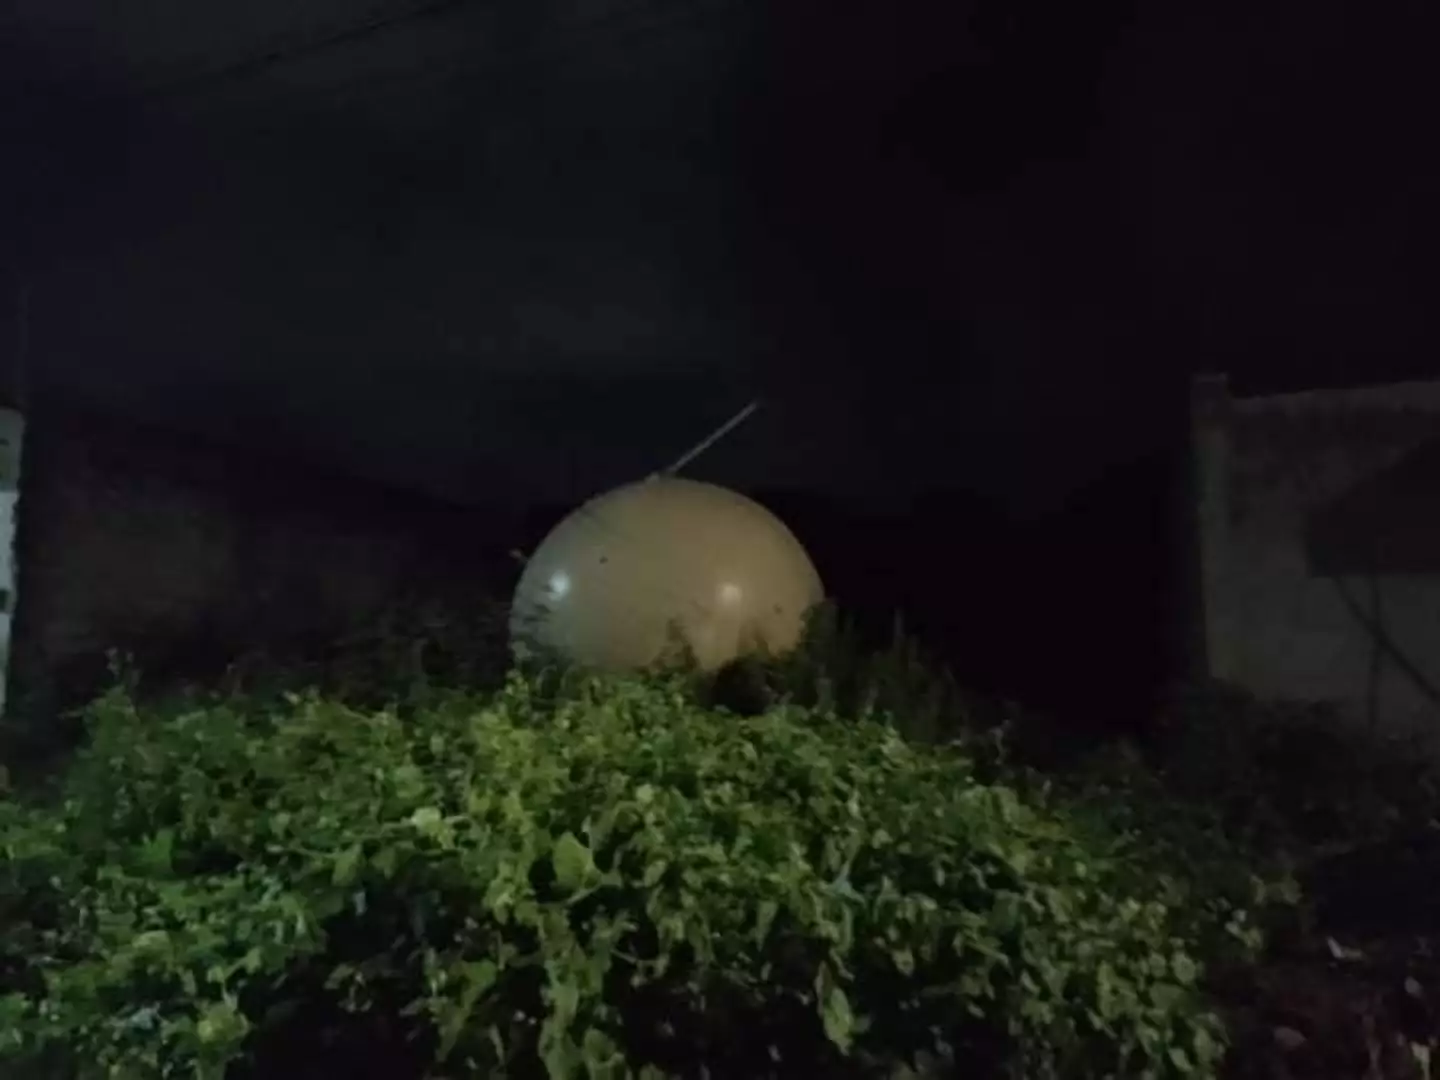 This is an image of the mysterious orb.